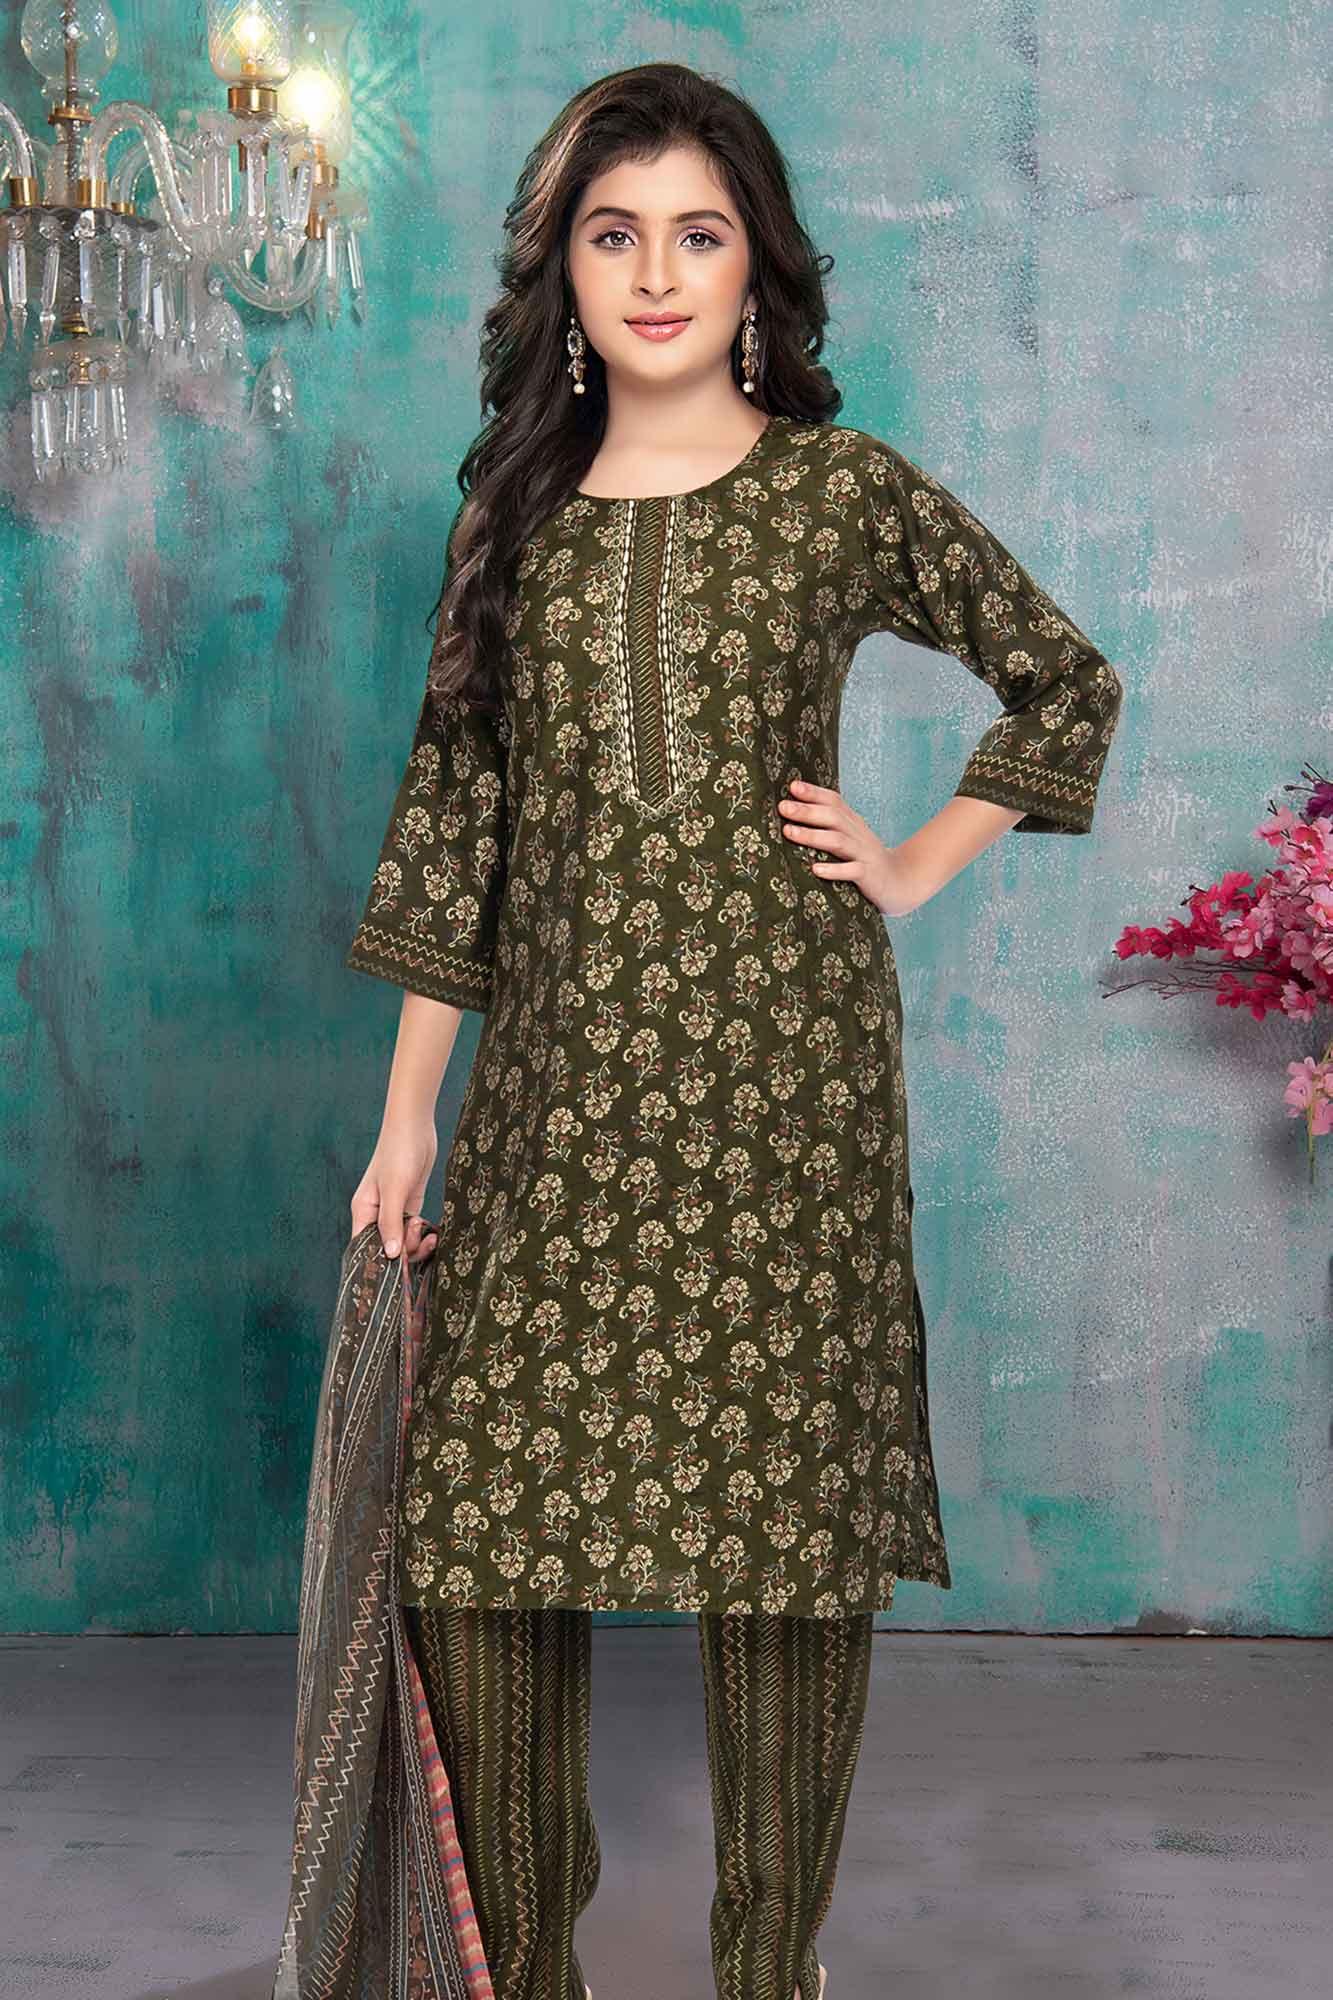 Buy Daily Wear Kurtis for Women at the Best Price | Libas